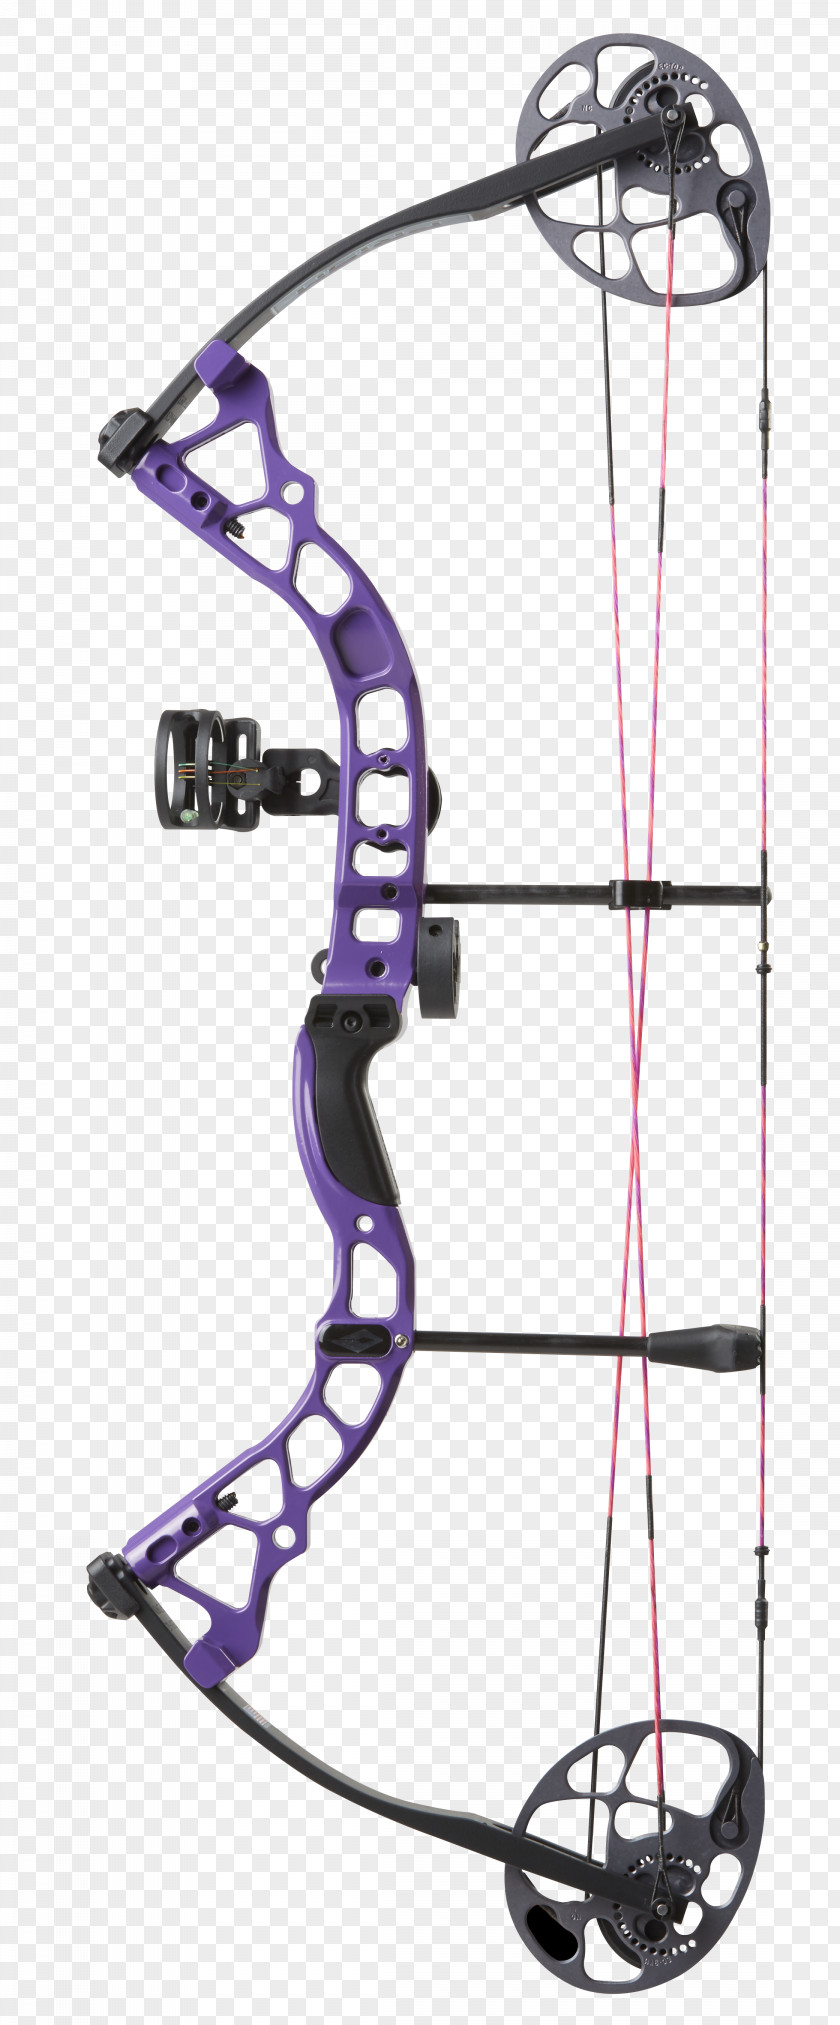 Archery Compound Bows Bow And Arrow Hunting Binary Cam PNG